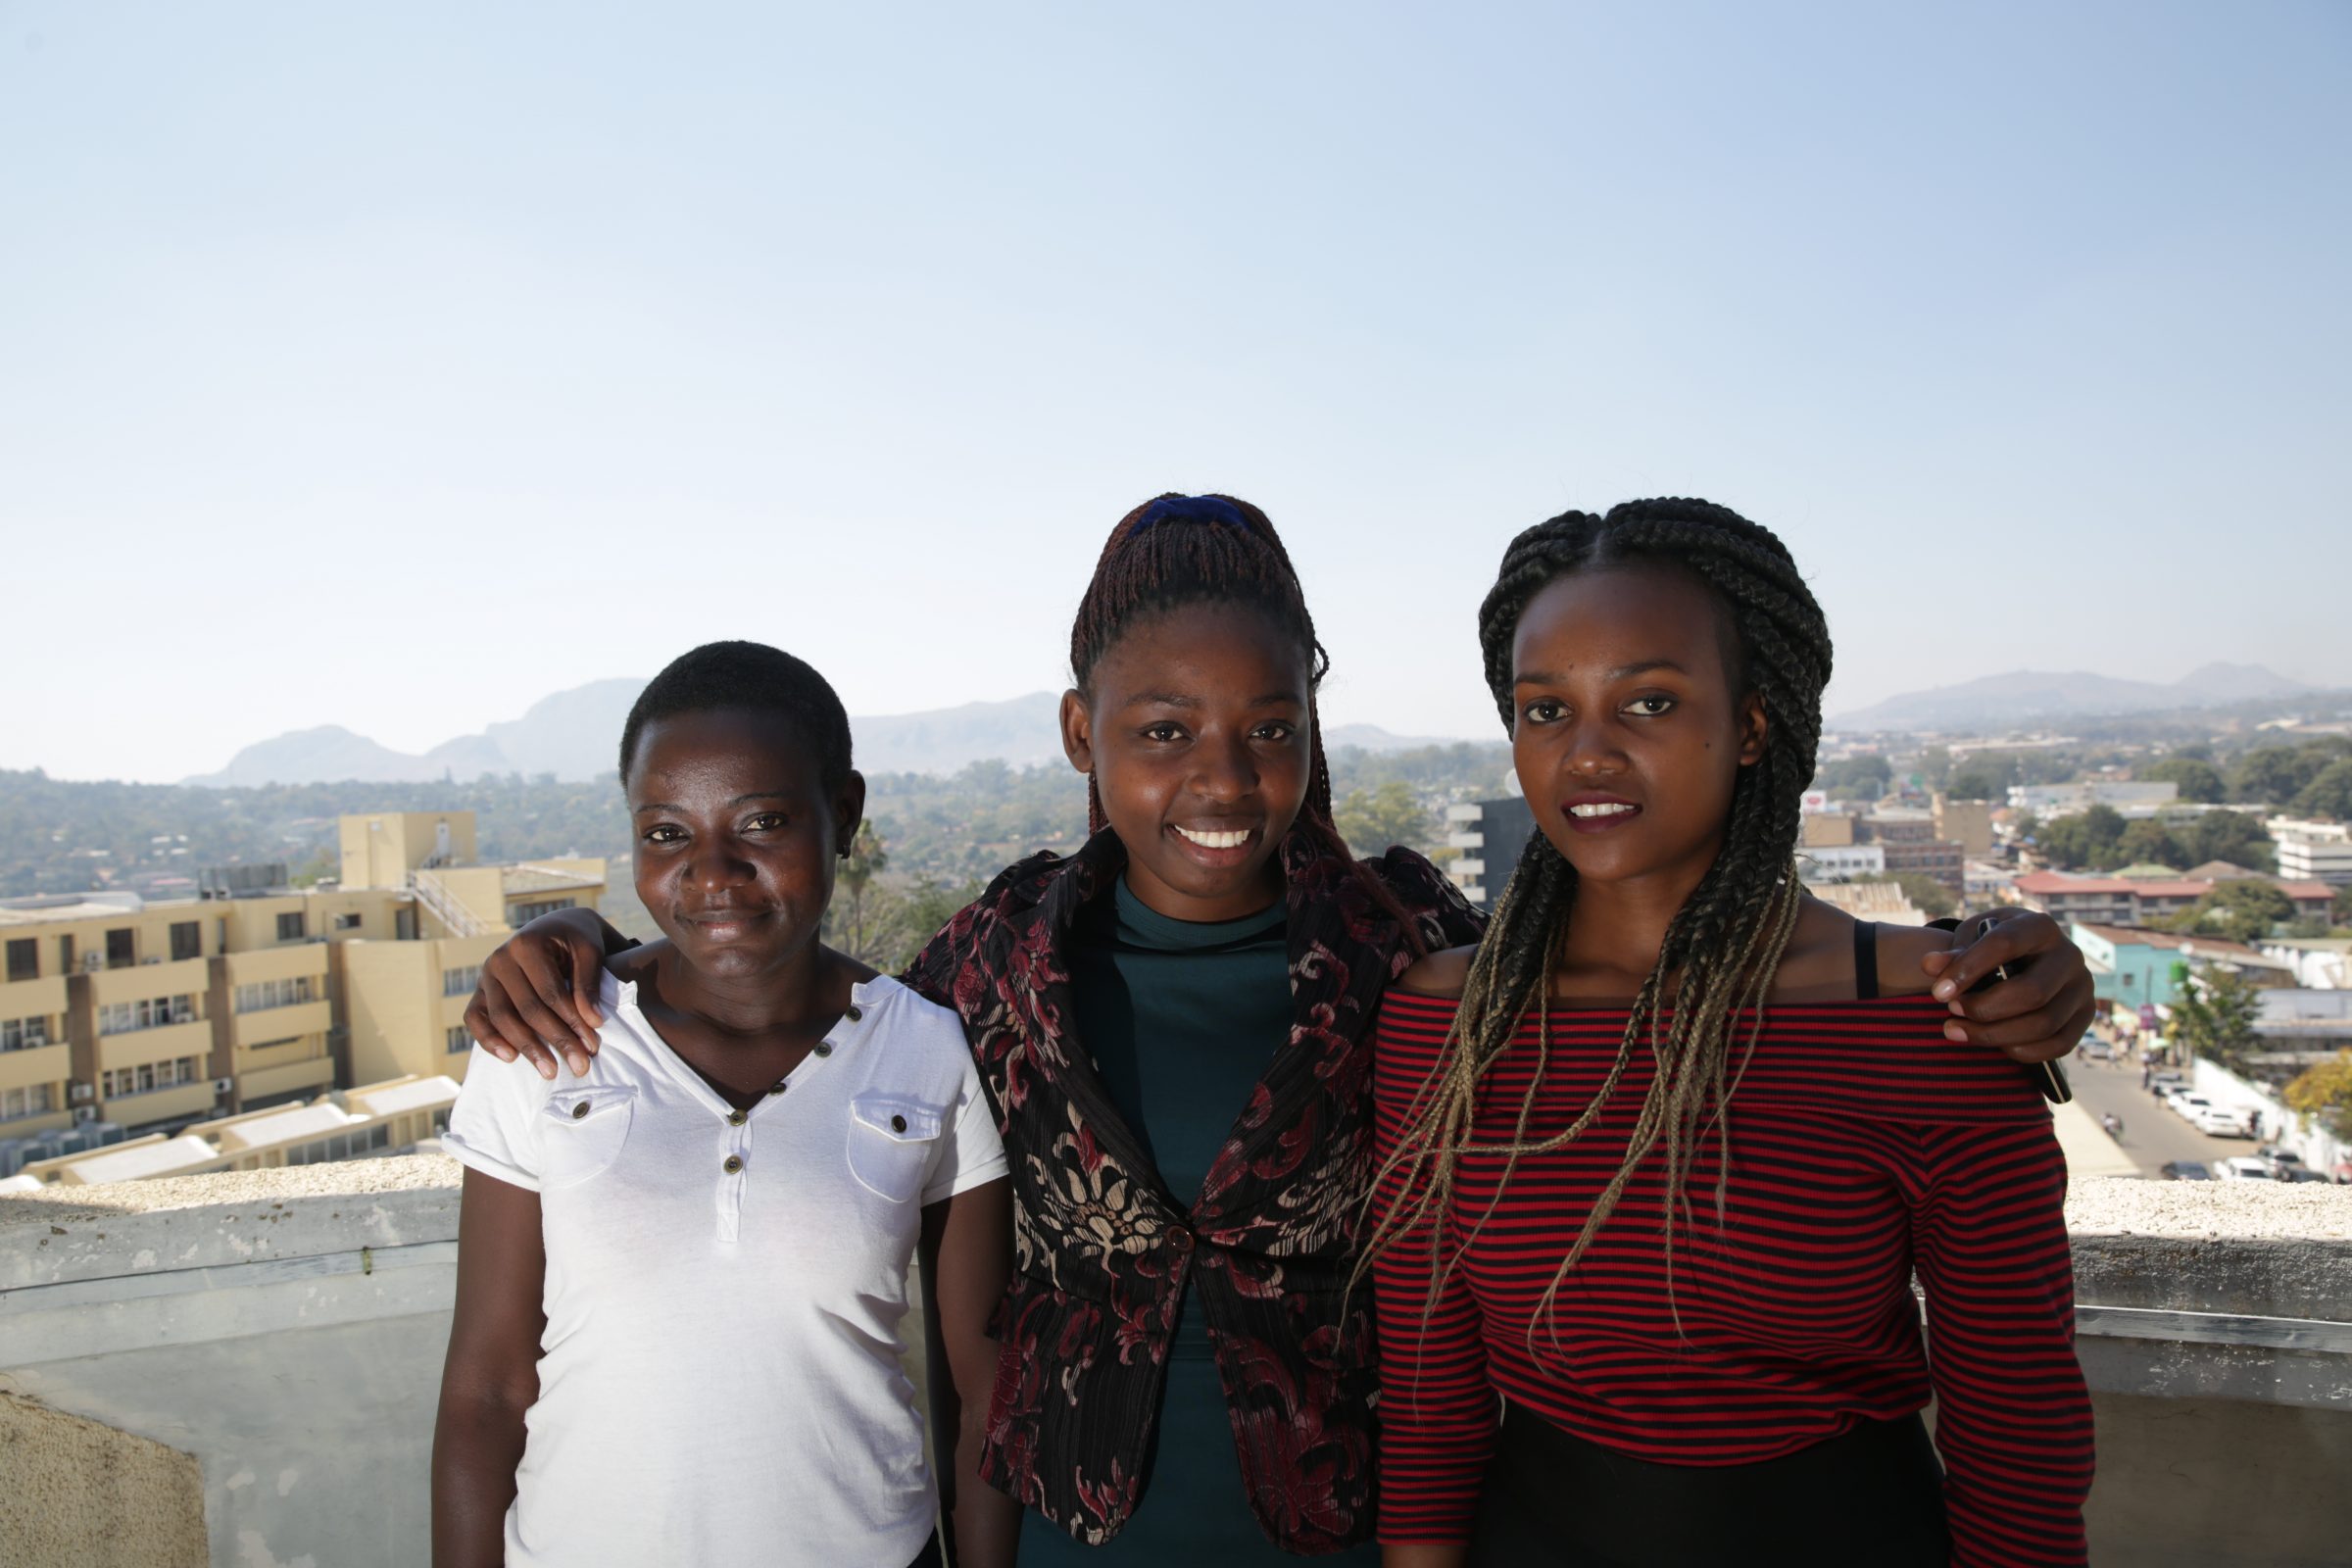 Photograph of three scholarship recipients posing together on the roof of ESCOM’s Blantyre office